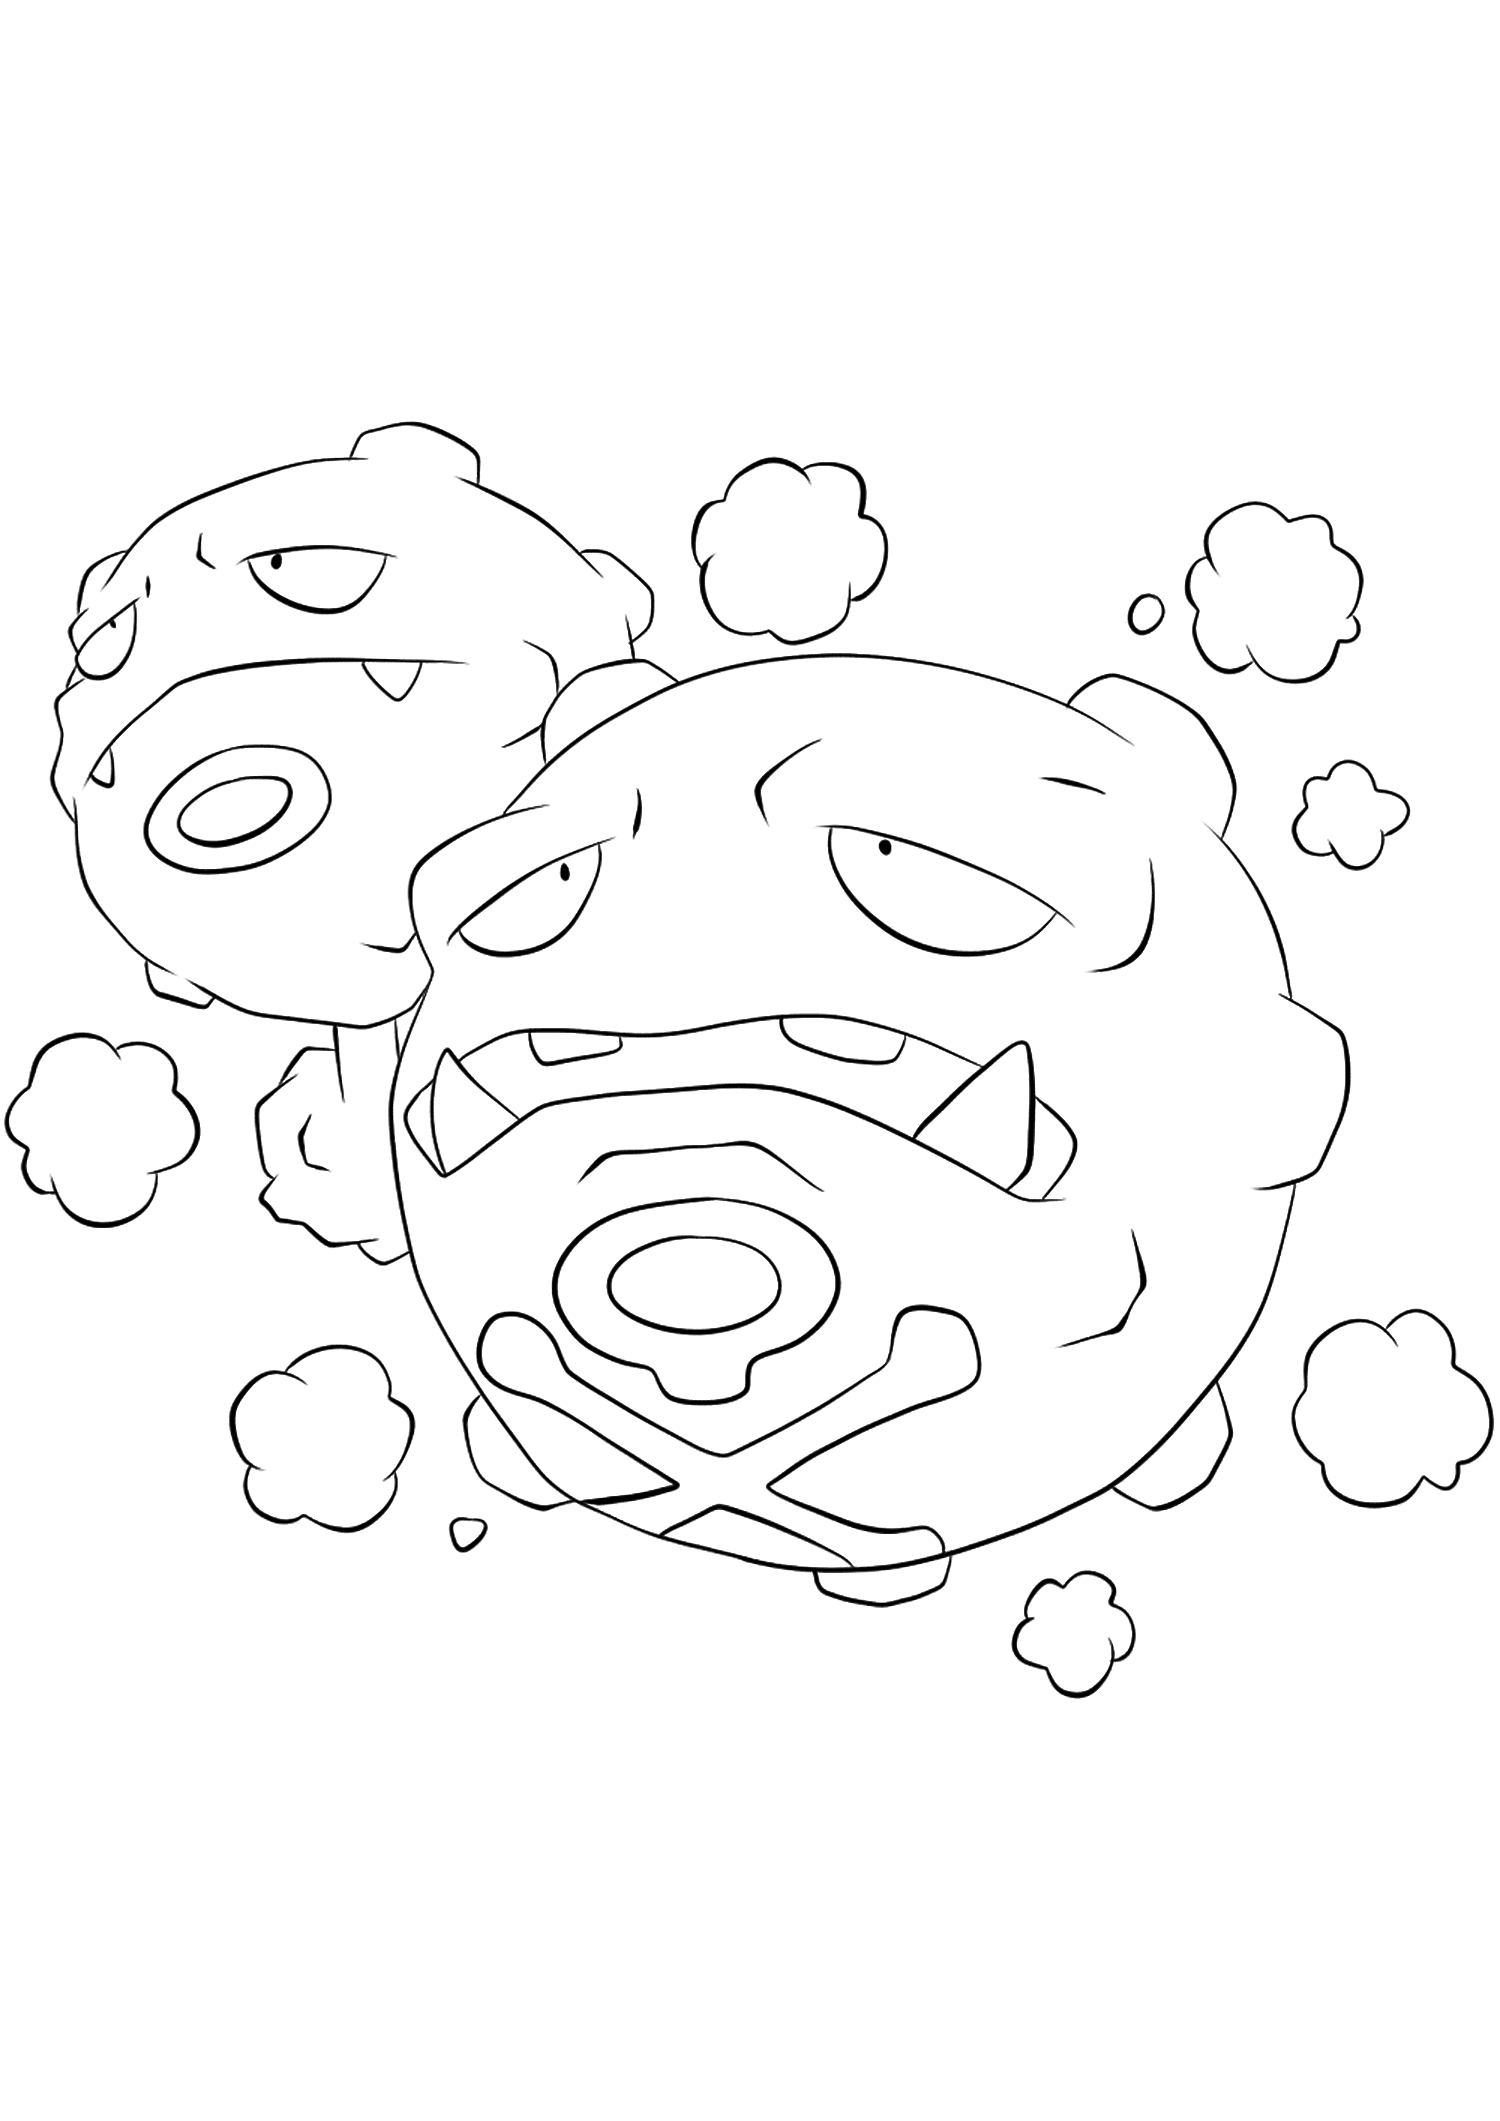 Weezing (No.110). Weezing Coloring page, Generation I Pokemon of type PoisonOriginal image credit: Pokemon linearts by Lilly Gerbil on Deviantart.Permission:  All rights reserved © Pokemon company and Ken Sugimori.